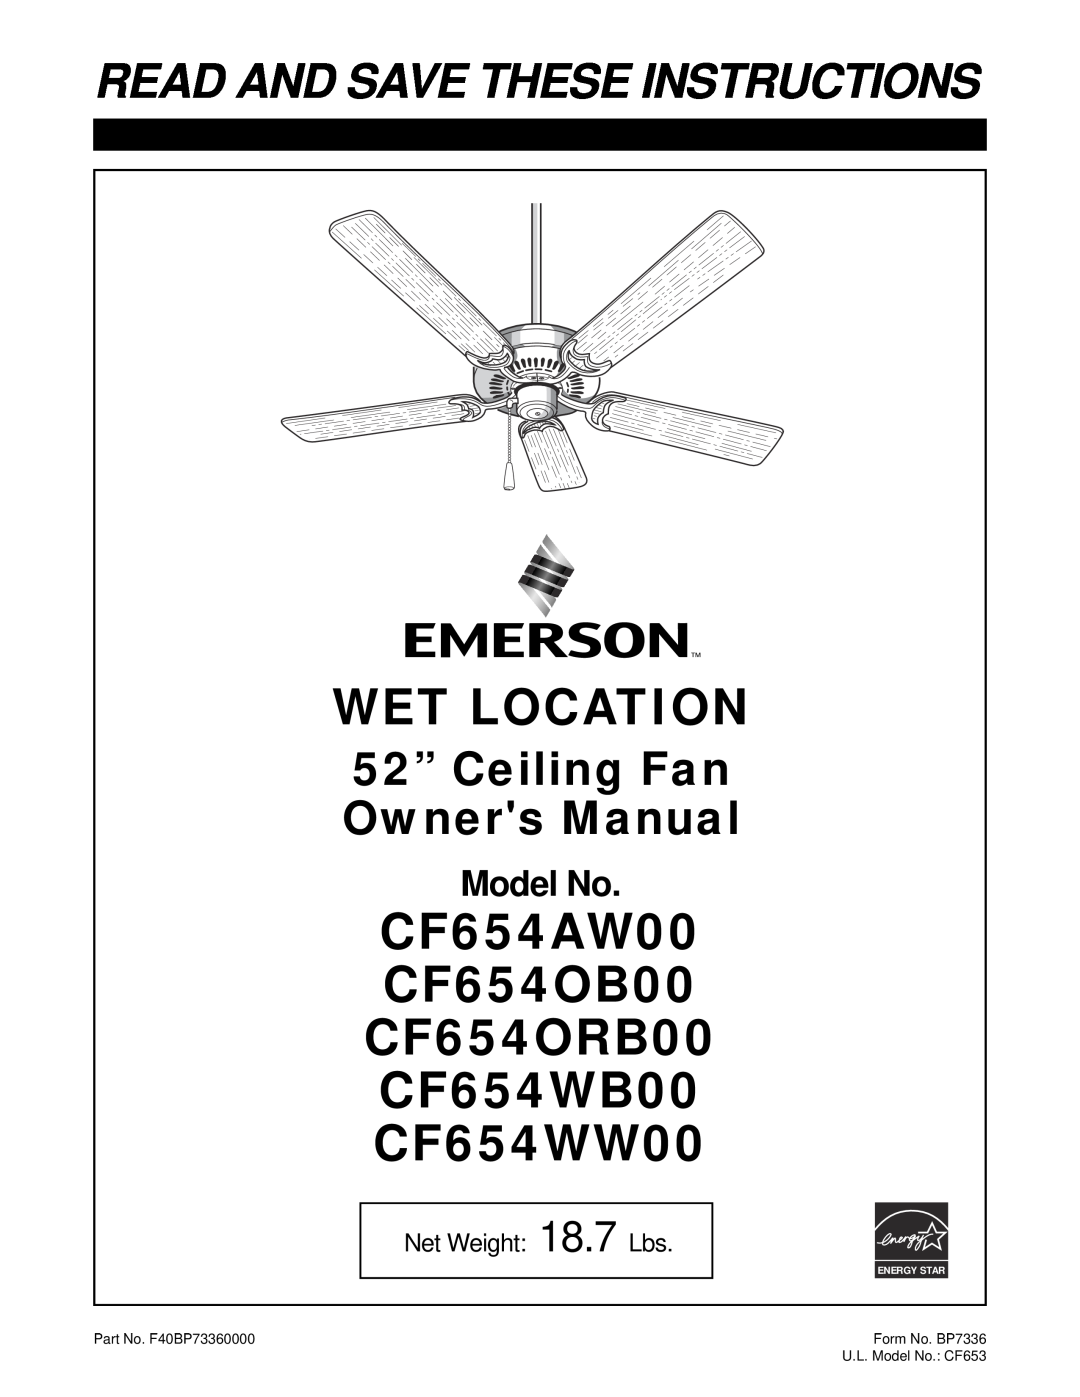 Emerson owner manual Wet Location, CF654AW00 CF654OB00 CF654ORB00 CF654WB00 CF654WW00, Read And Save These Instructions 